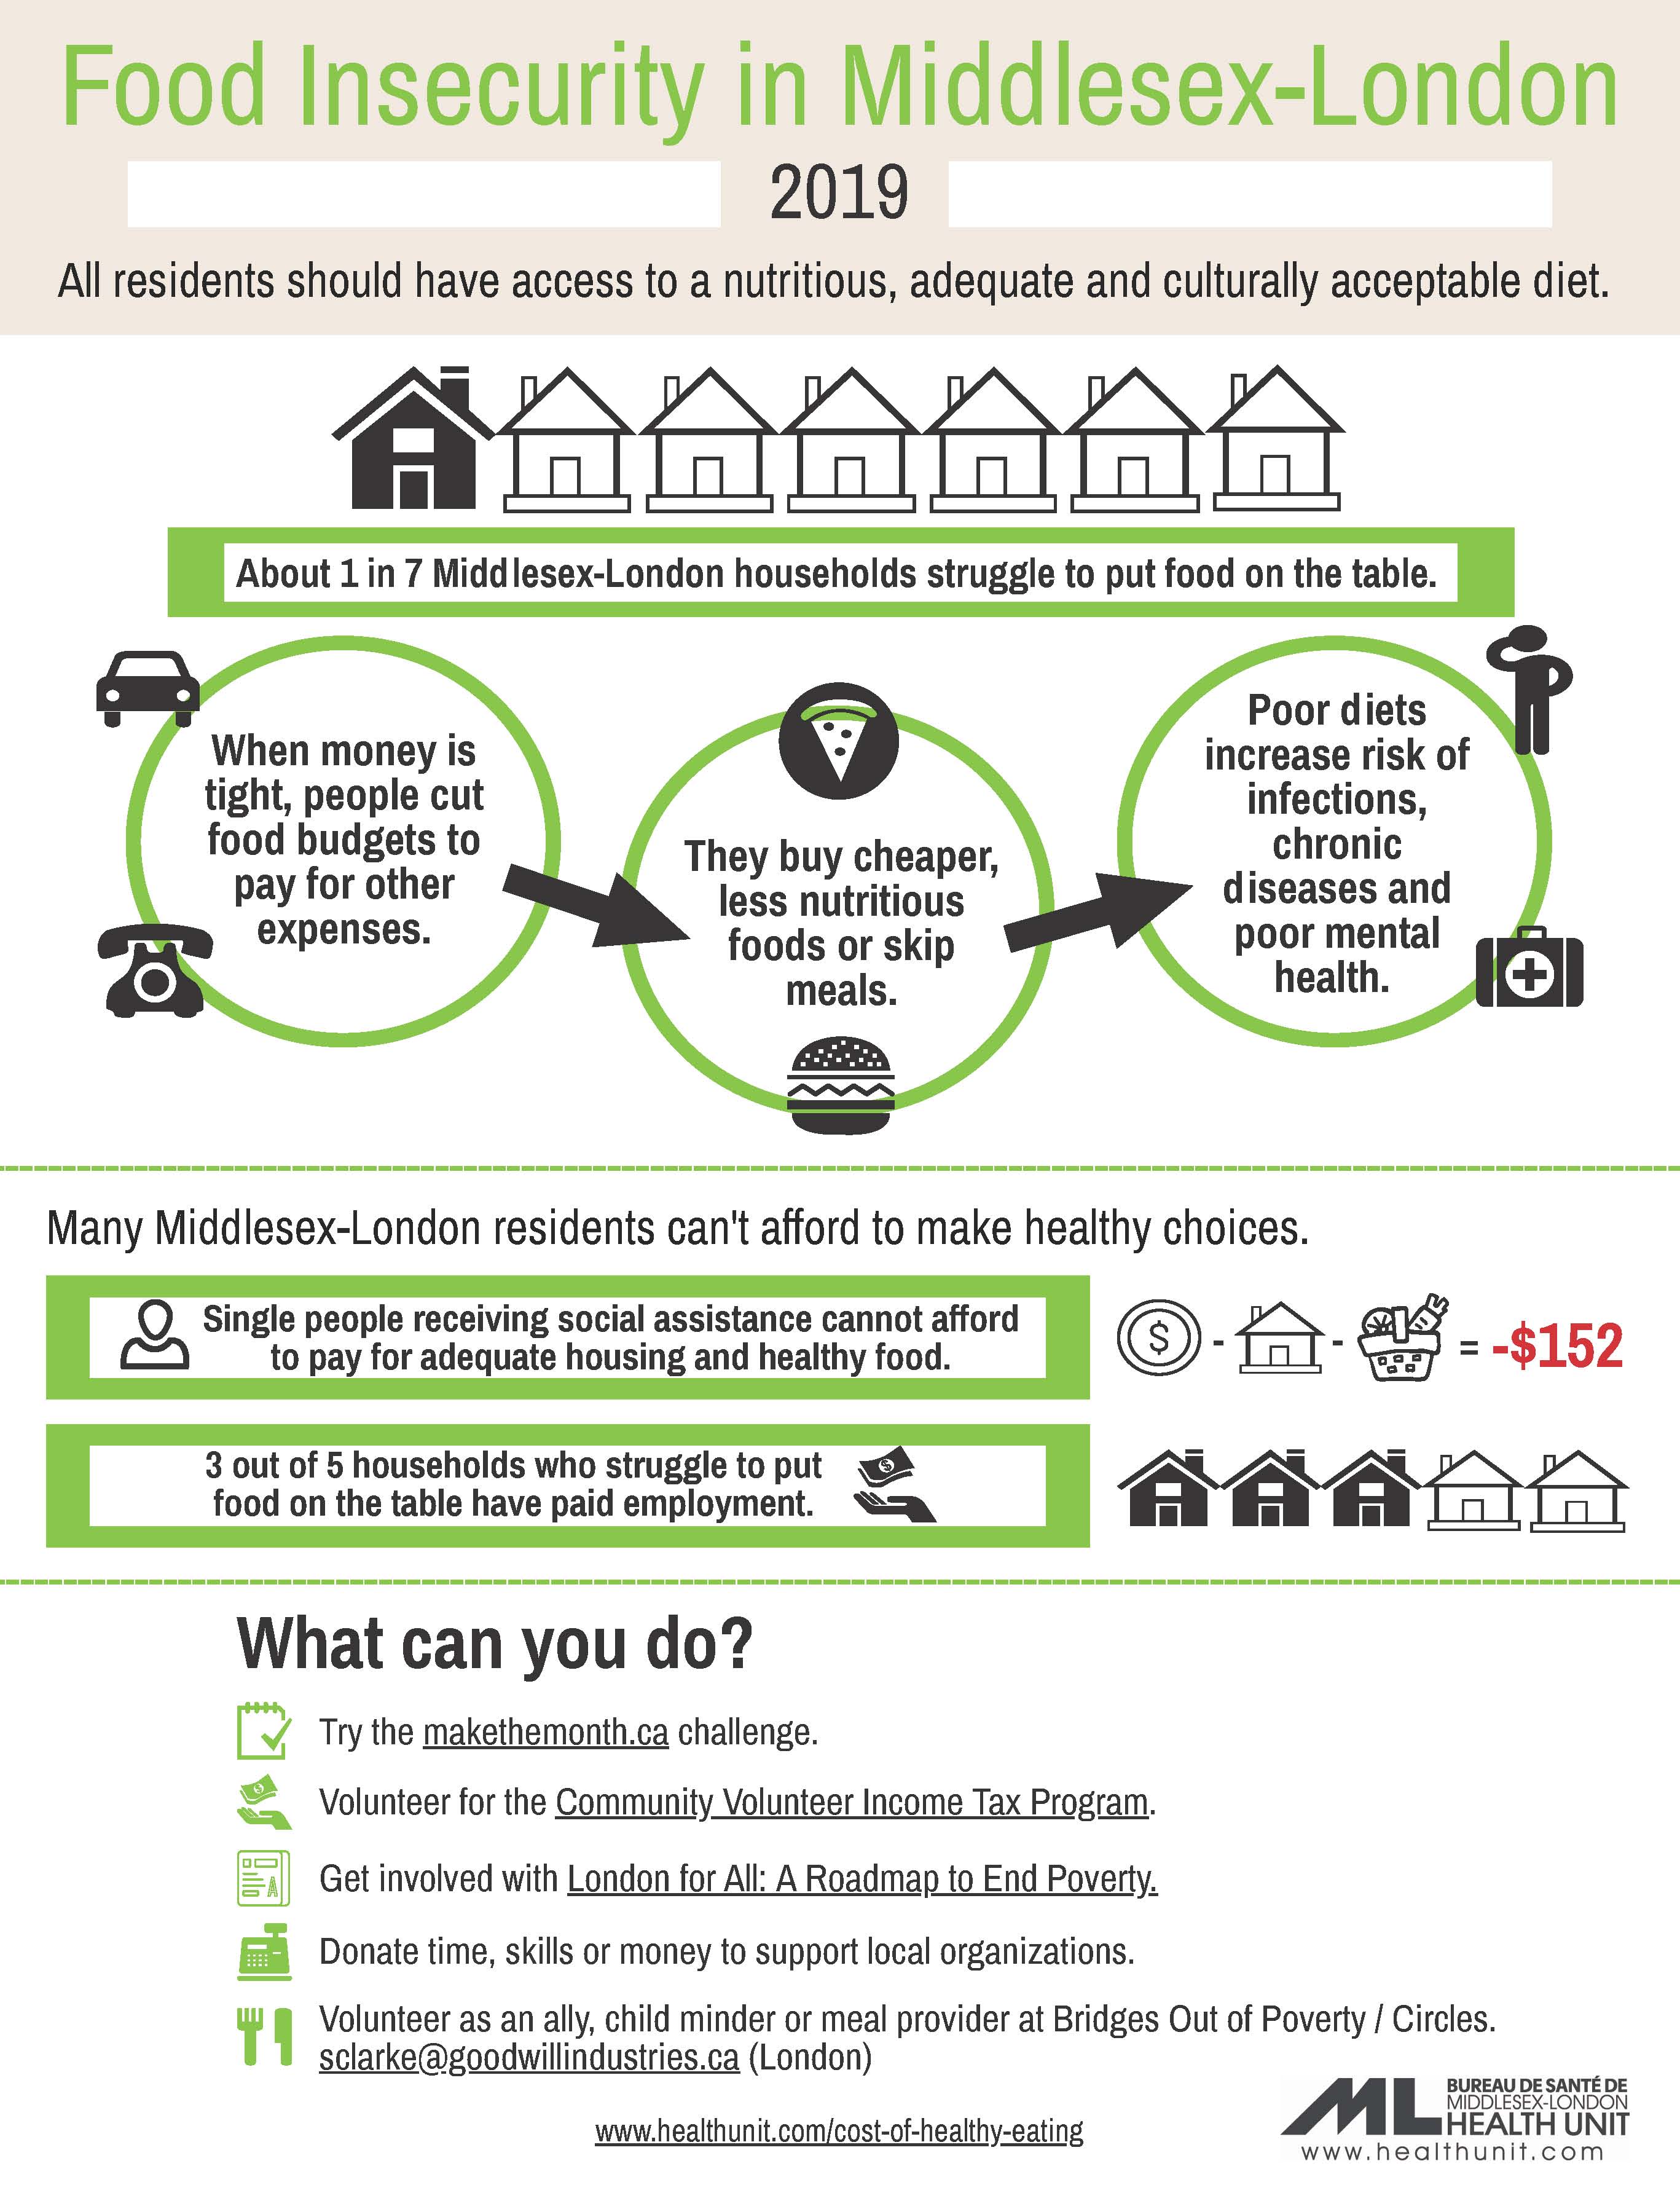 Food Insecurity - 2019 Infographic